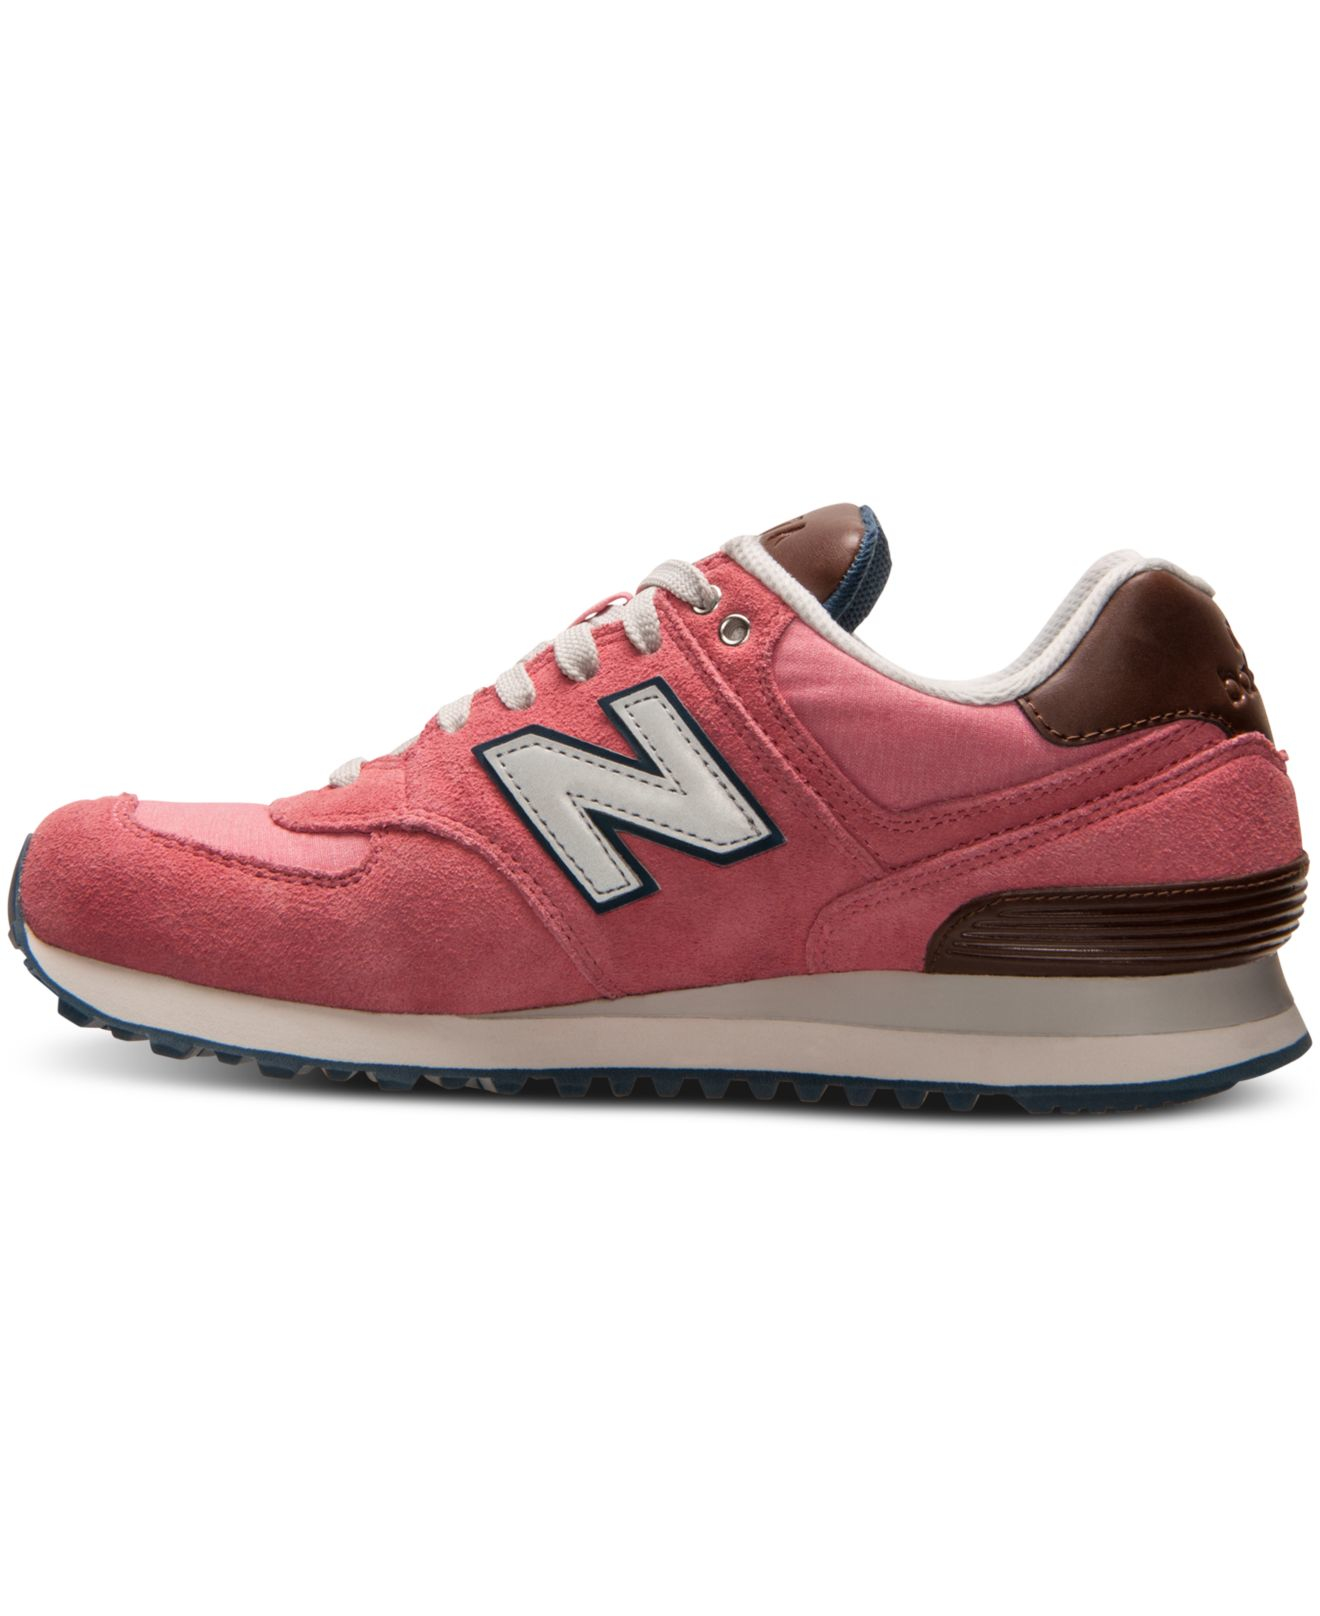 New balance Women's 574 Beach Cruiser Casual Sneakers From Finish Line ...